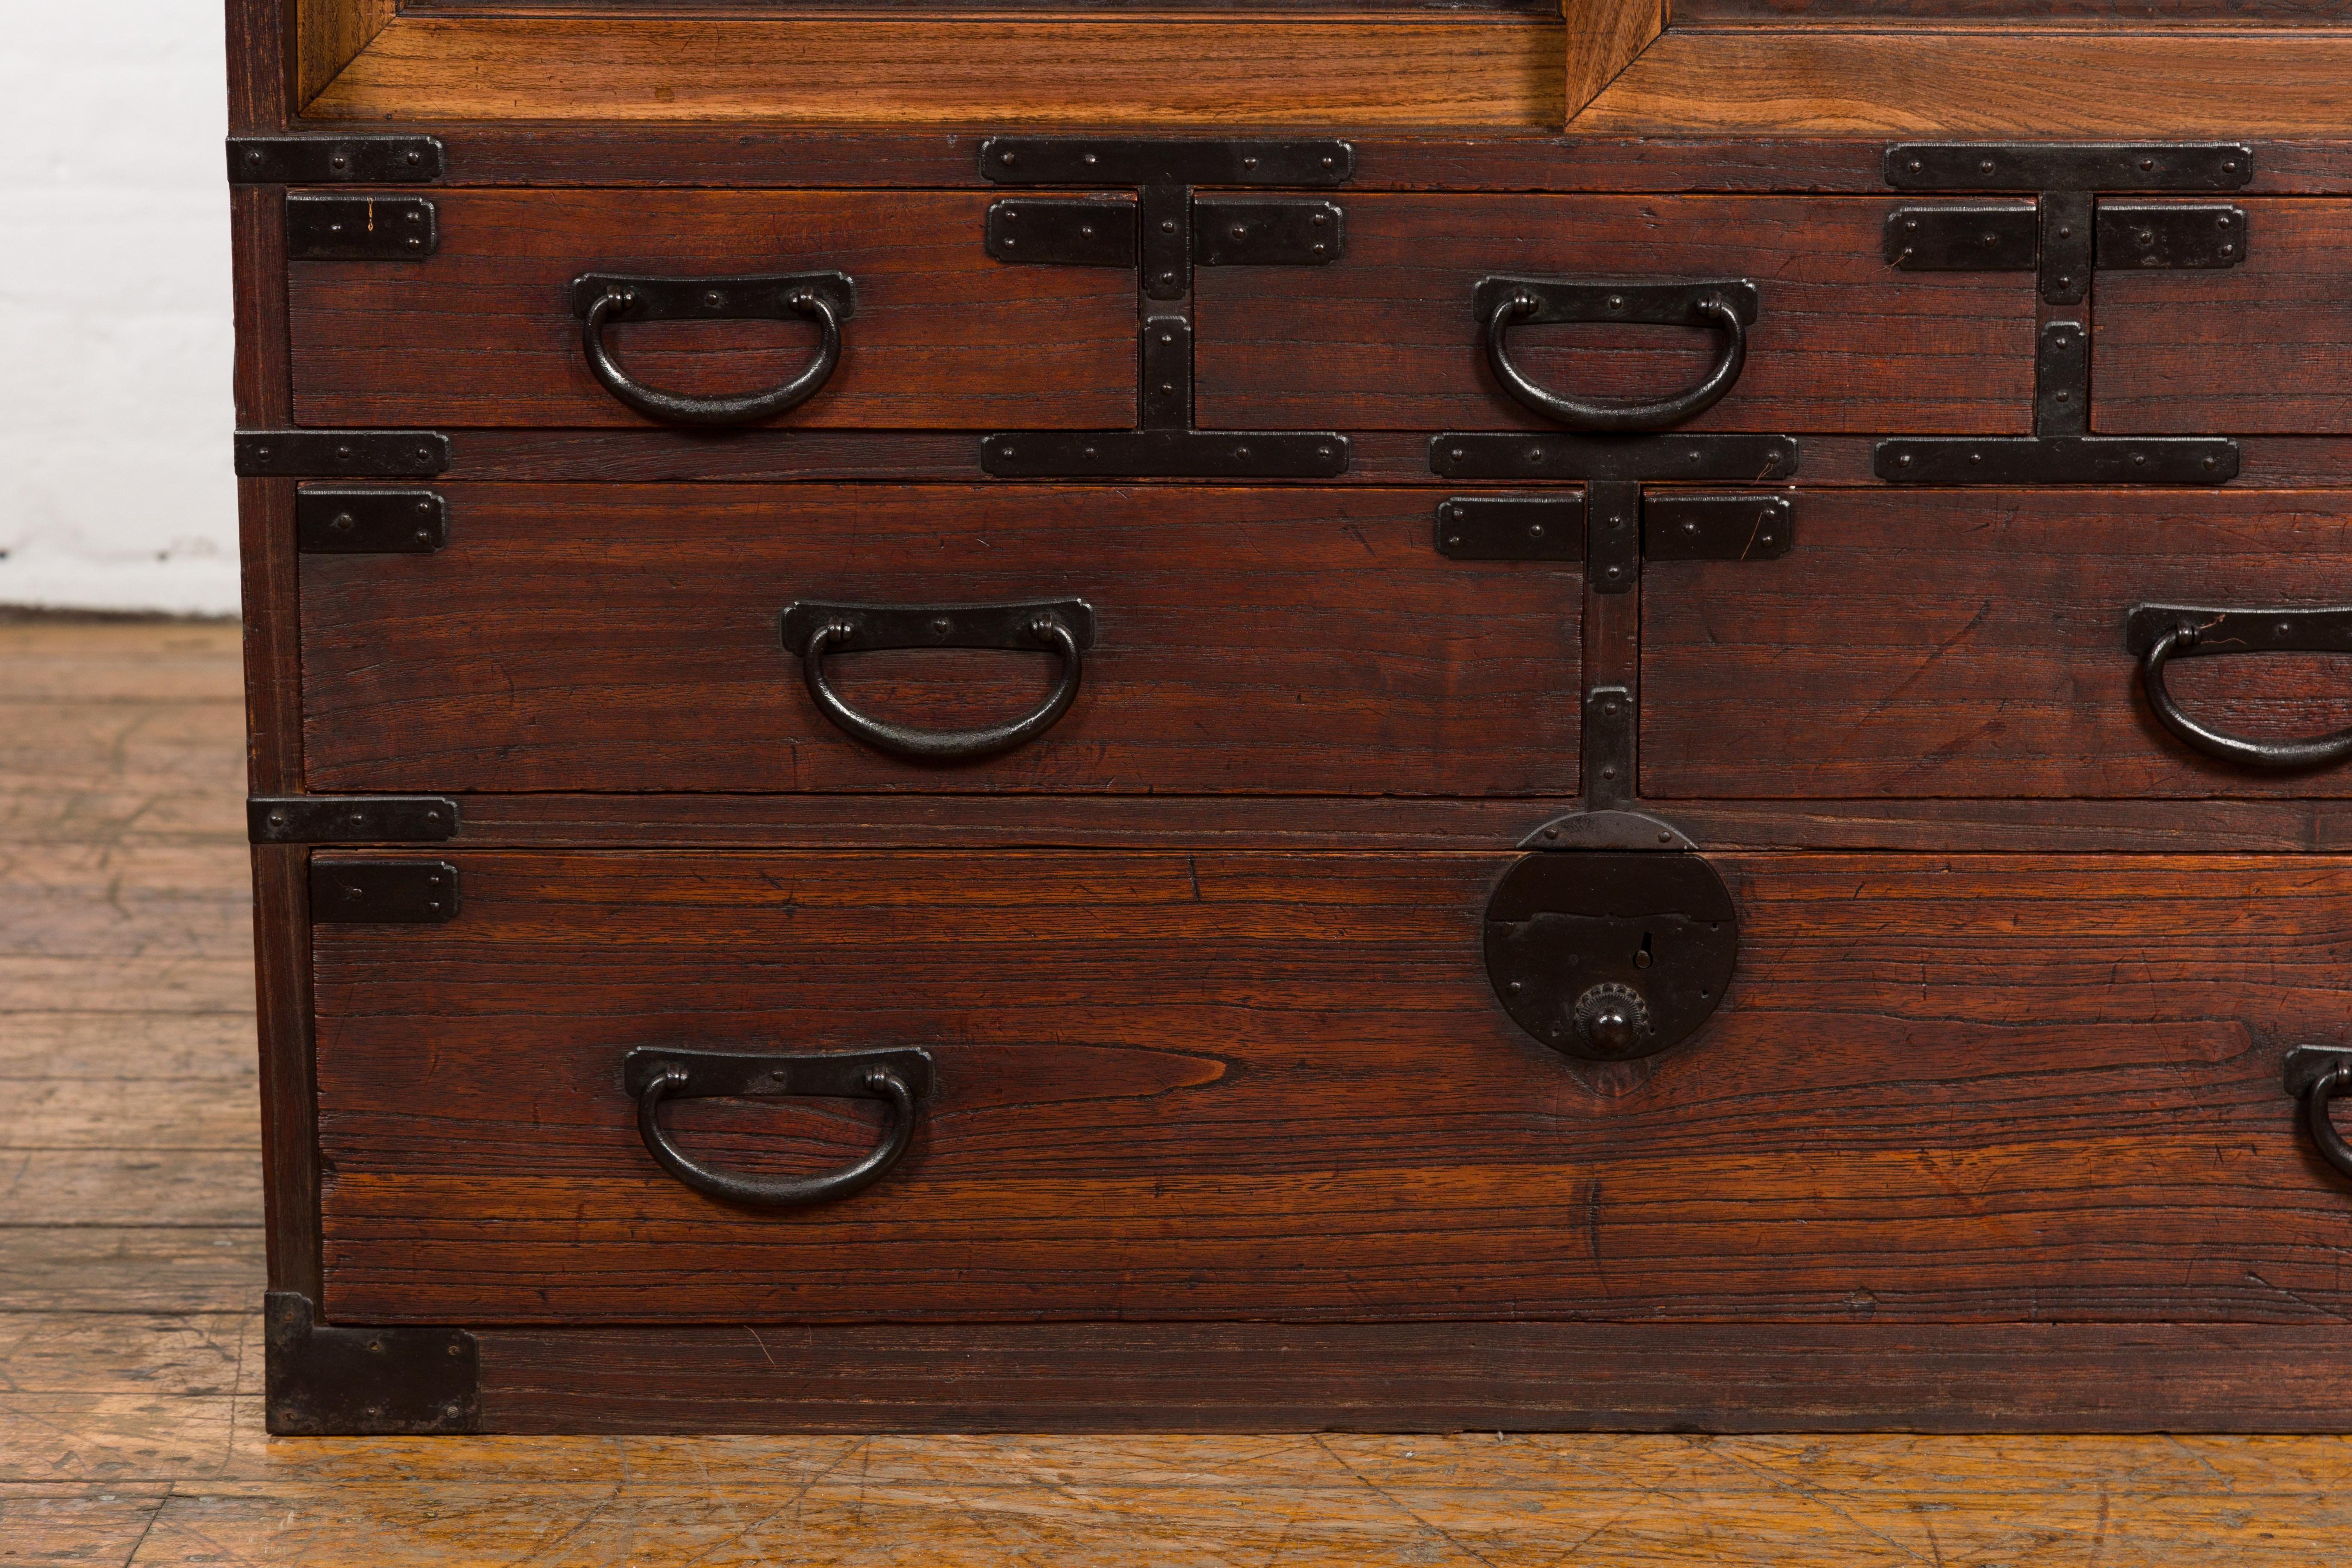 Japanese Meiji Period 19th Century Tansu Chest with Sliding Chest and Drawers For Sale 5